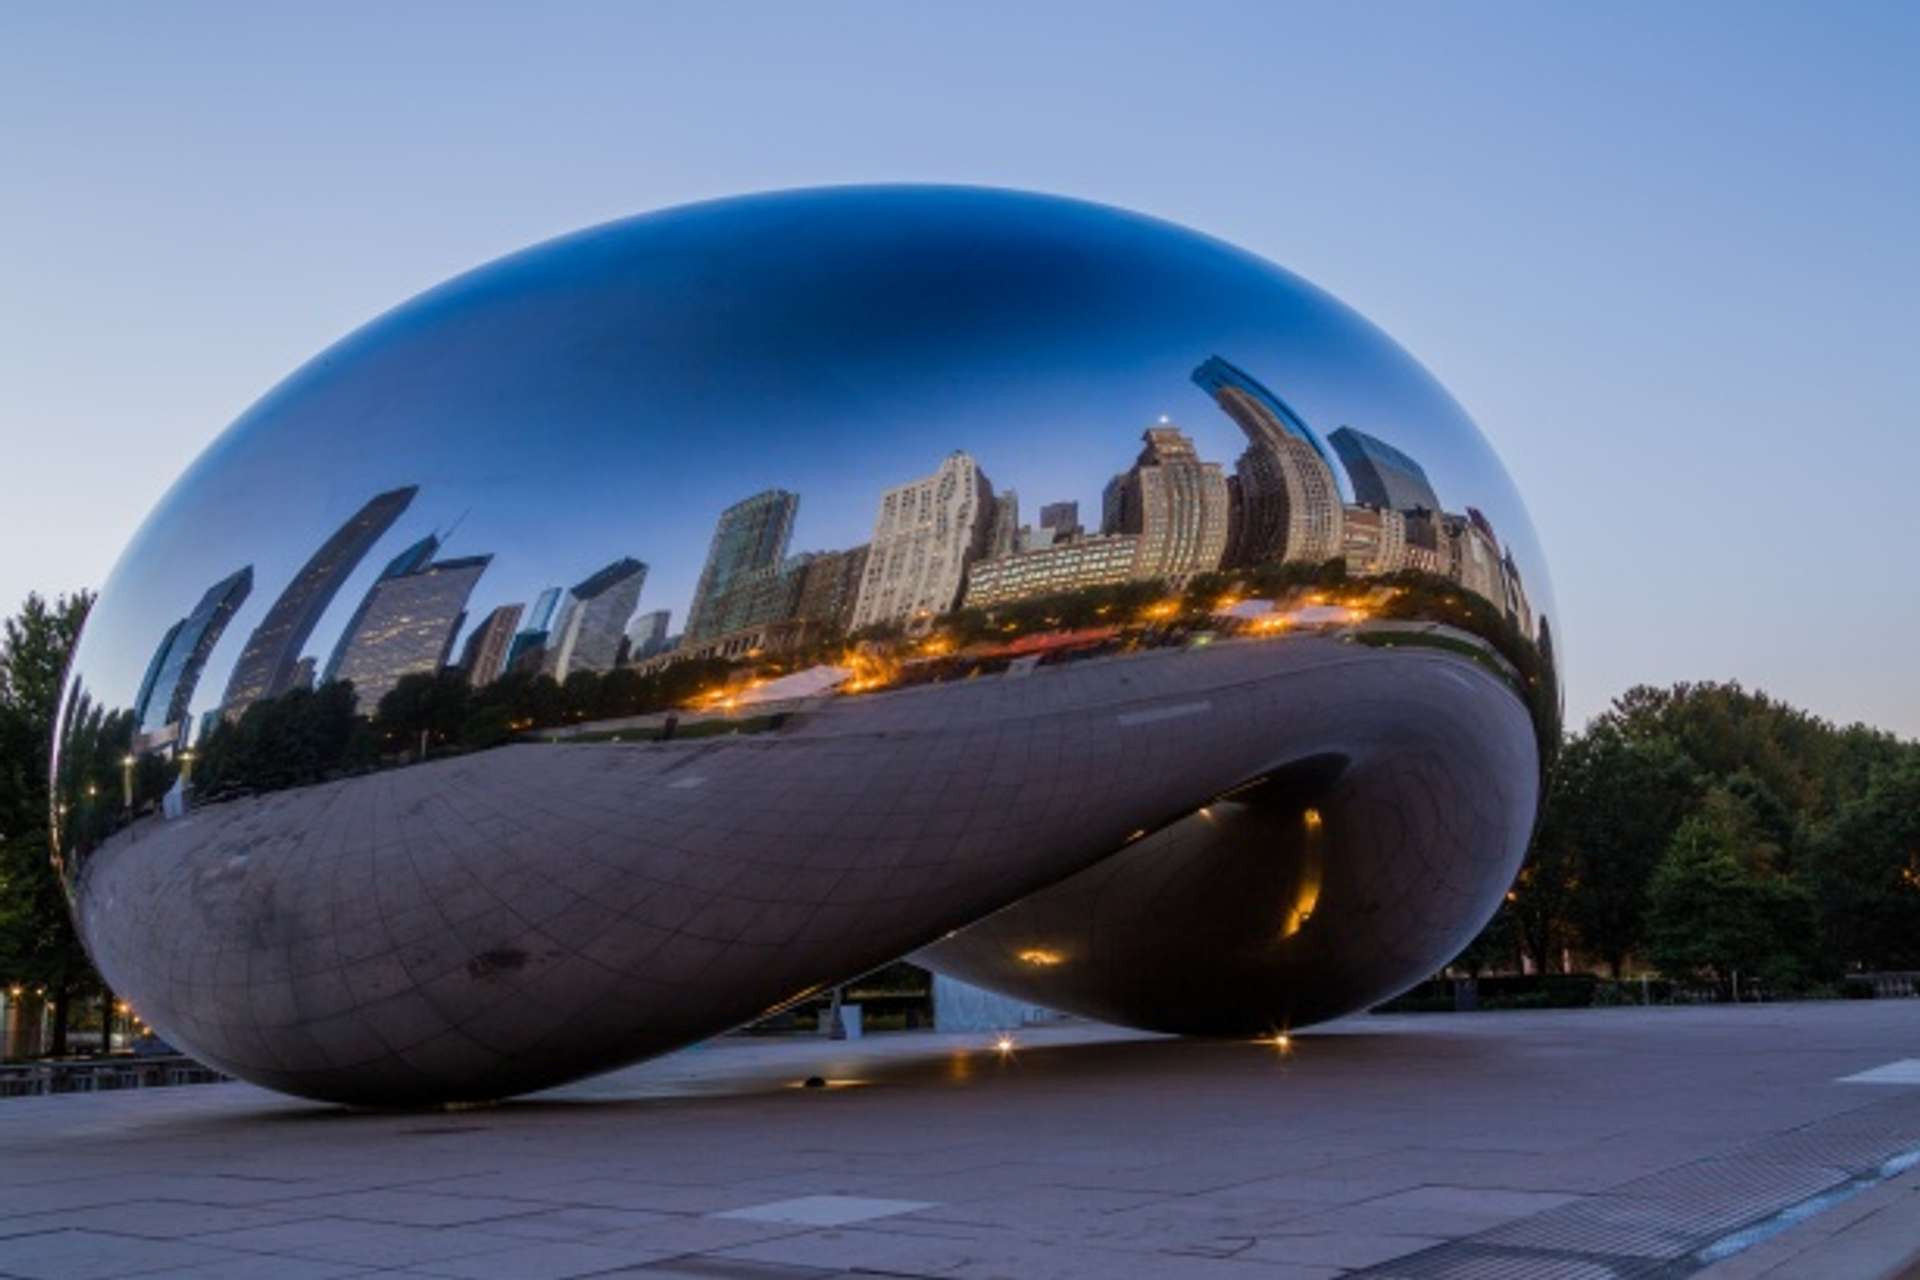 An image of the artwork Cloud Gate by Anish Kapoor. It is a giant reflective sculpture in the shape of a bean, from which it takes its informal name. It is possible to see Chicago’s cityscape reflected in the work.